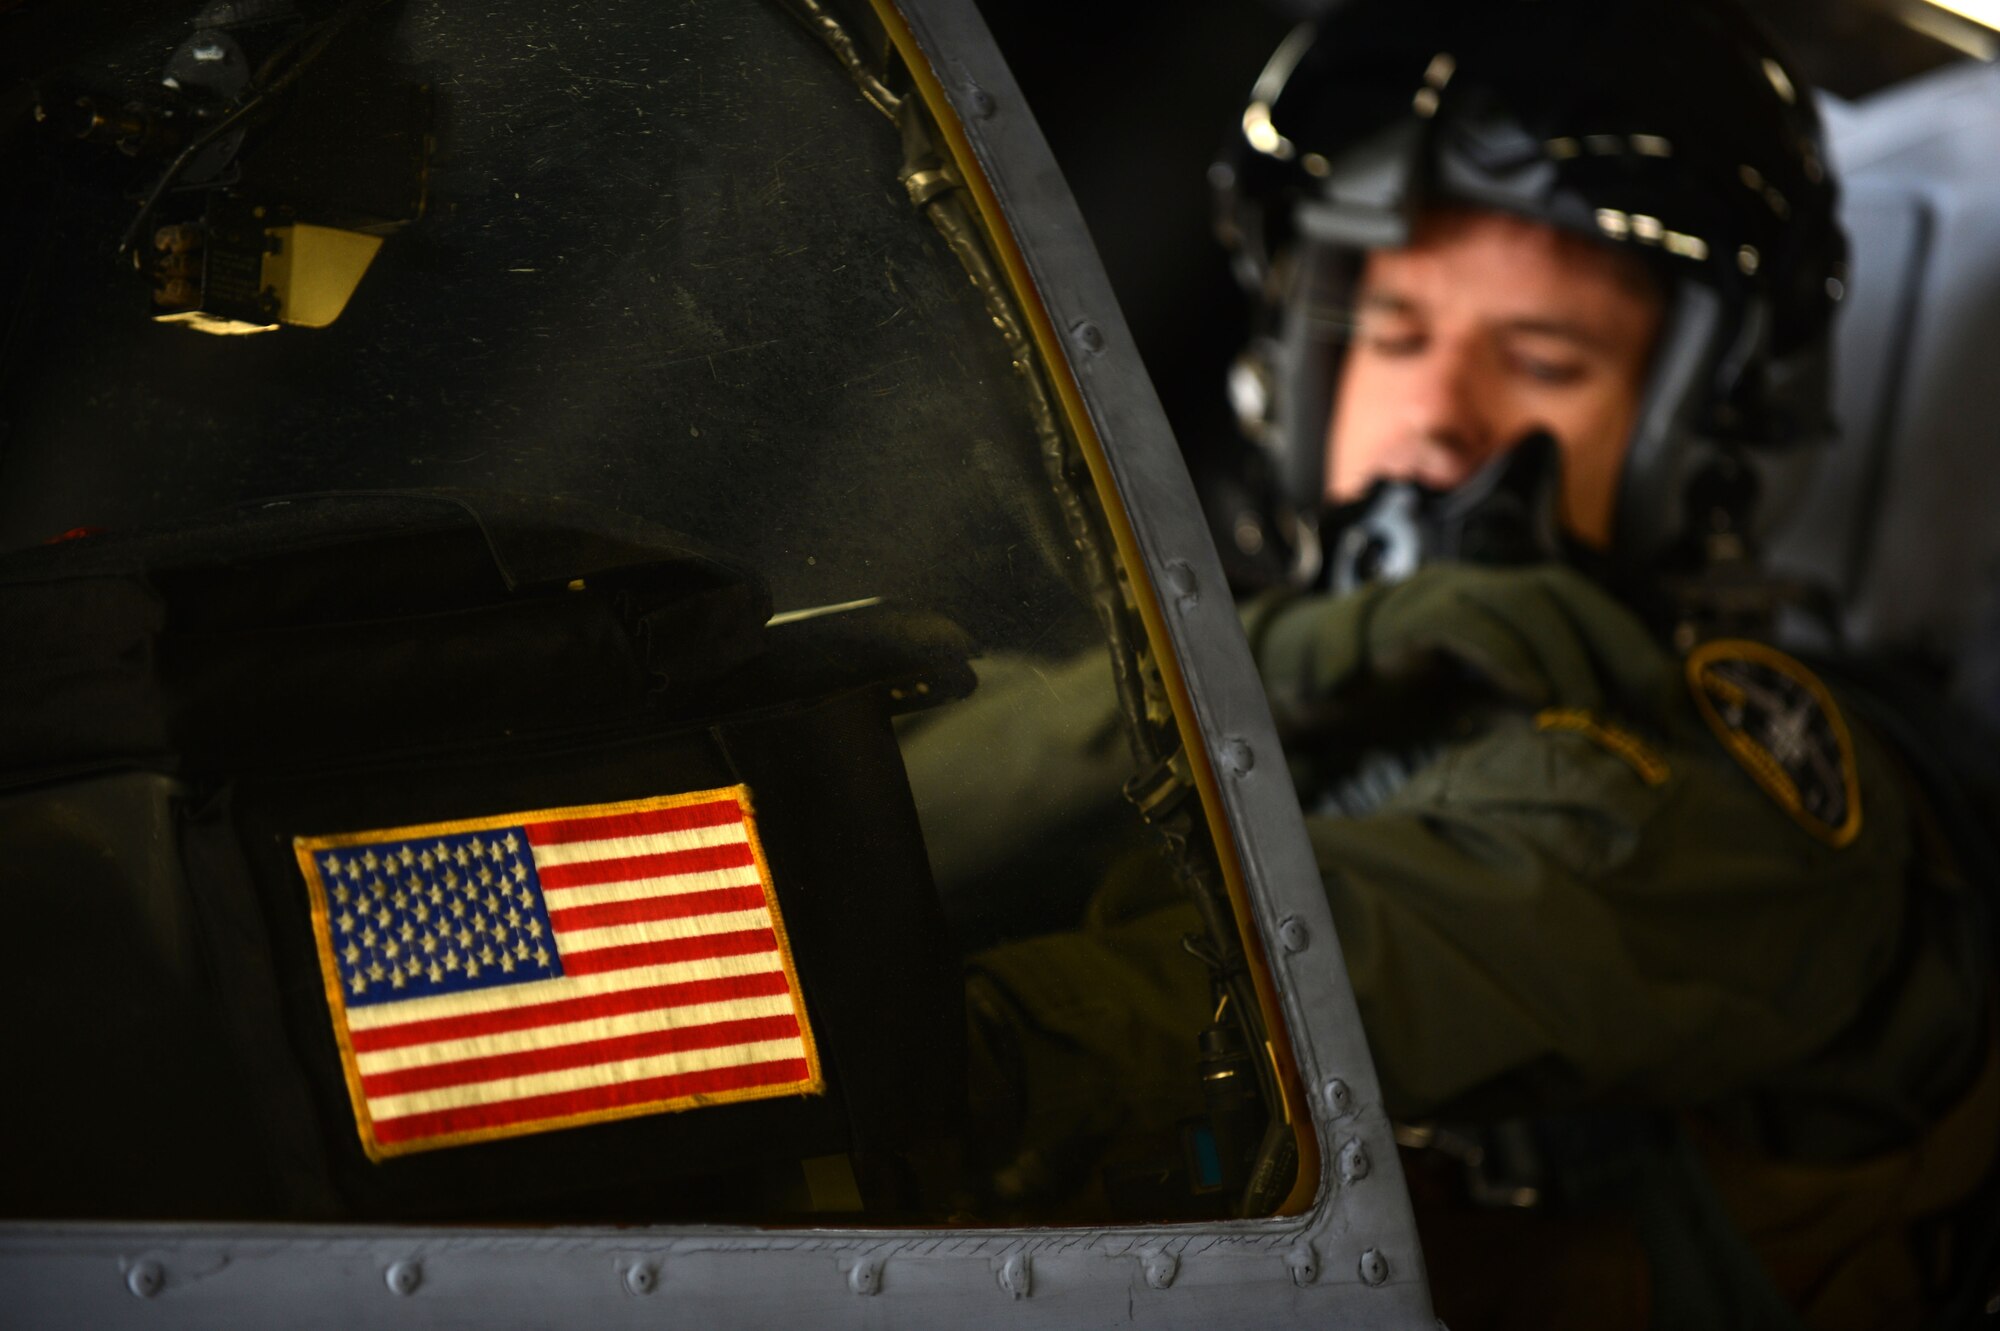 SPANGDAHLEM AIR BASE, Germany –U.S. Air Force Capt. Gregory Ulrich, 81st Fighter Squadron pilot from Fairfield, Calif., prepares to depart for the squadron’s final tactical sortie May 14, 2013. The inactivation is due to the termination of the Continuing Resolution provision and the enacting of the 2013 National Defense Authorization Act. (U.S. Air Force photo by Airman 1st Class Gustavo Castillo/Released)